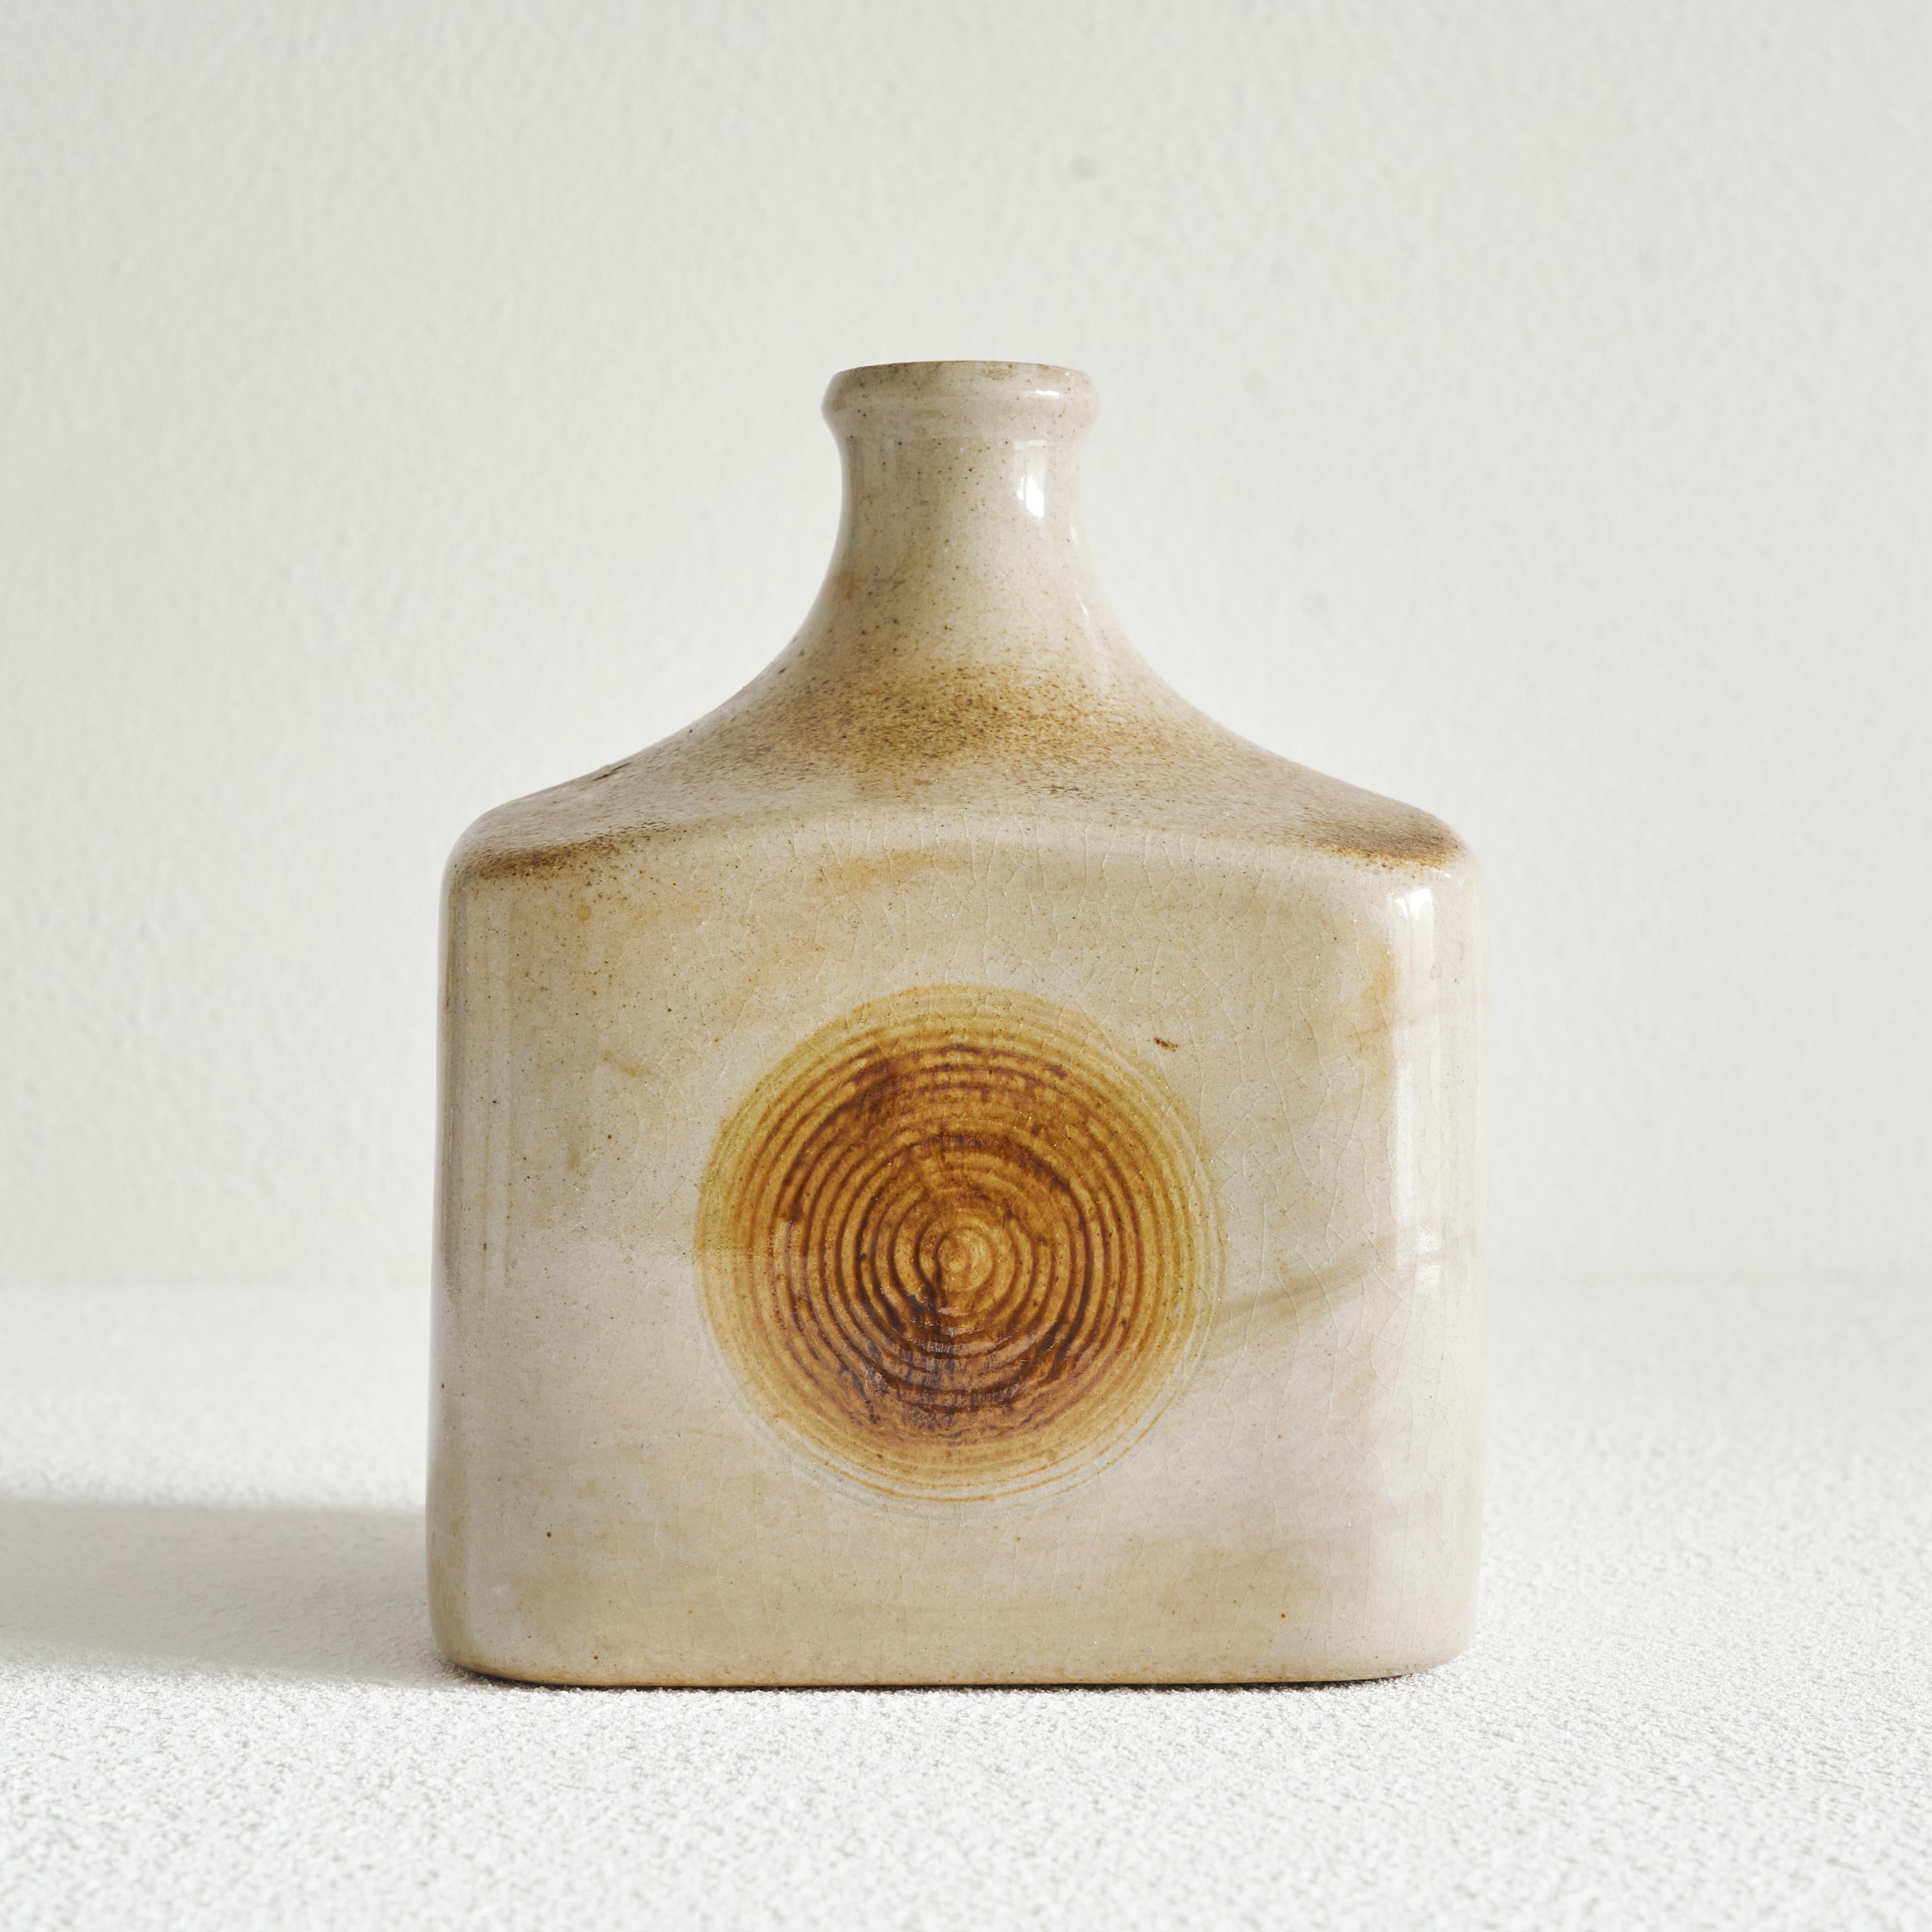 Studio pottery vase with ‘wood imprint’, Mid 20th century. 

Wonderful and interesting studio pottery vase with a distinct ‘wood’ imprint of growth rings in the glaze on every side. A very interesting and elegant decor, combined with a very